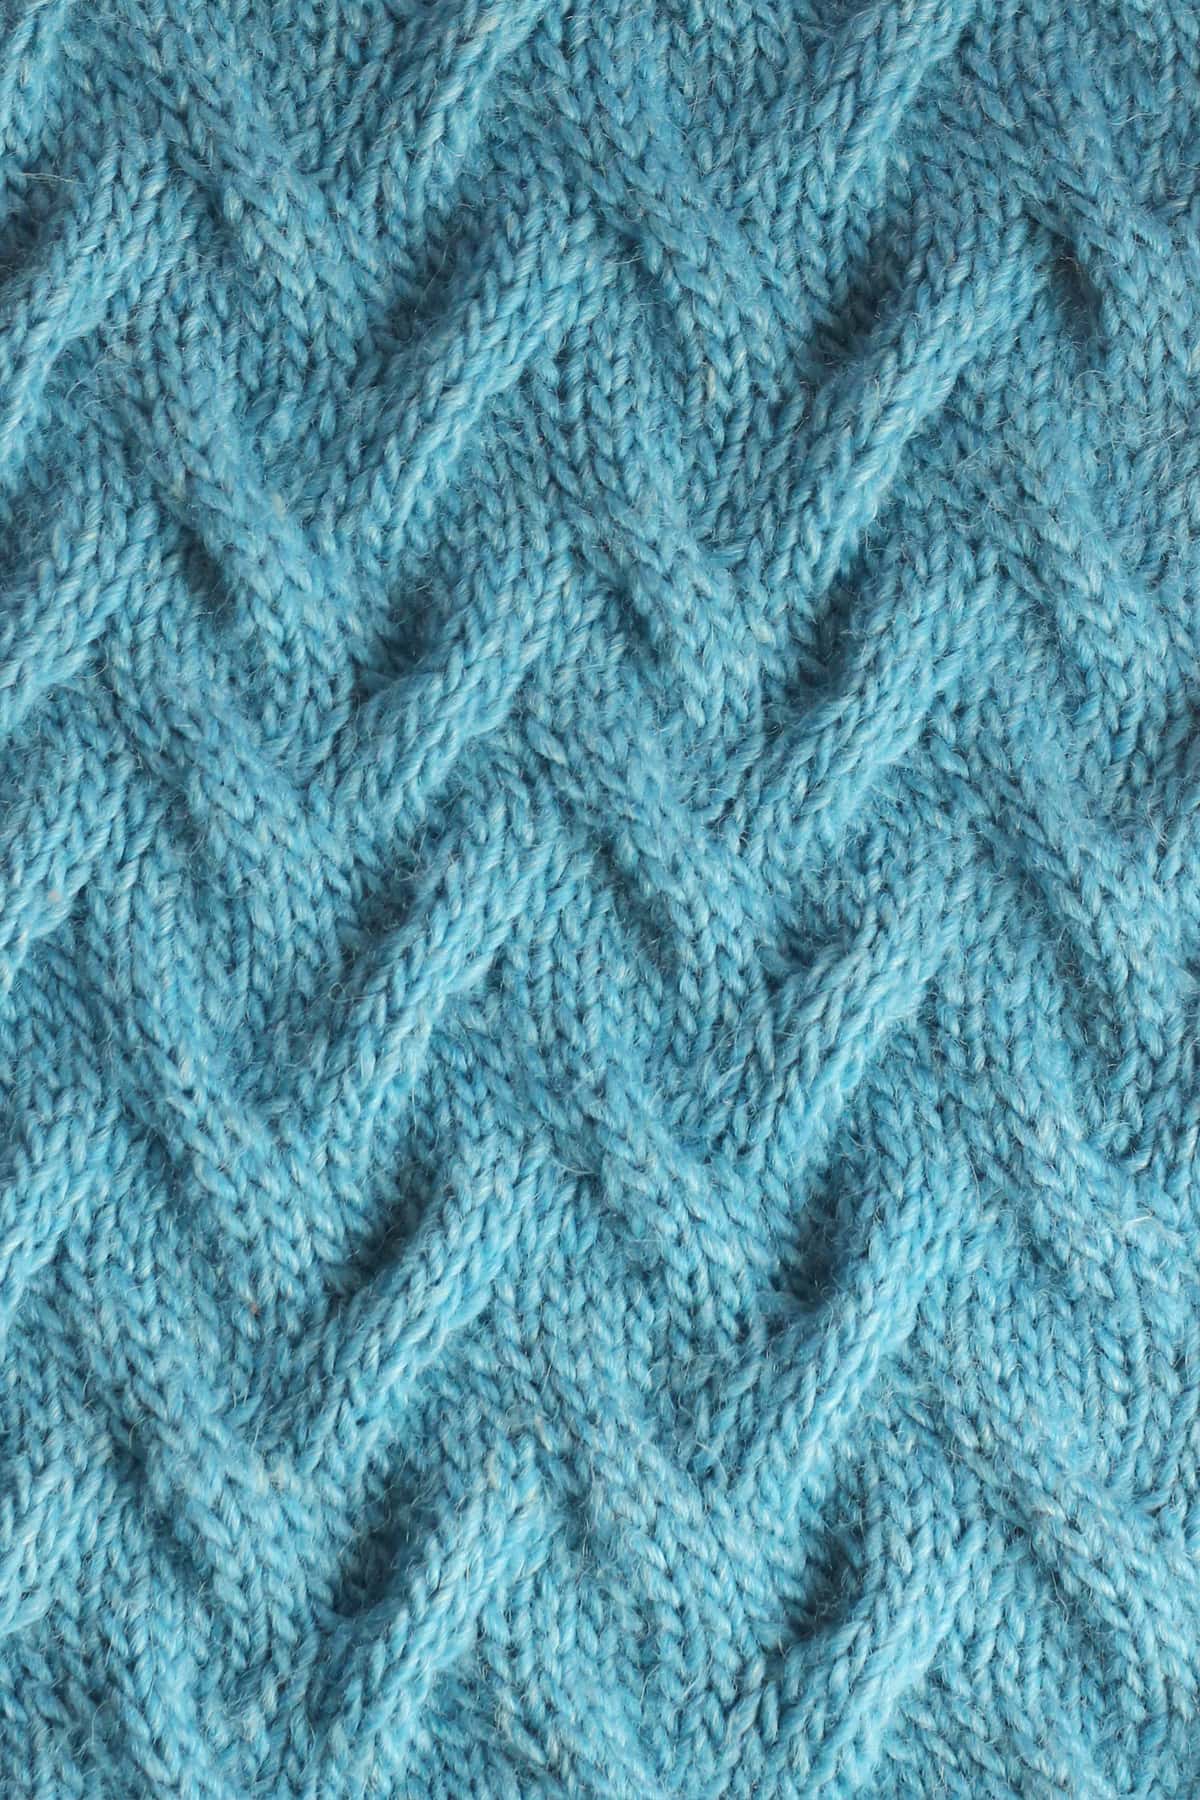 Close up of the Sand Cable knit stitch texture in blue yarn color.